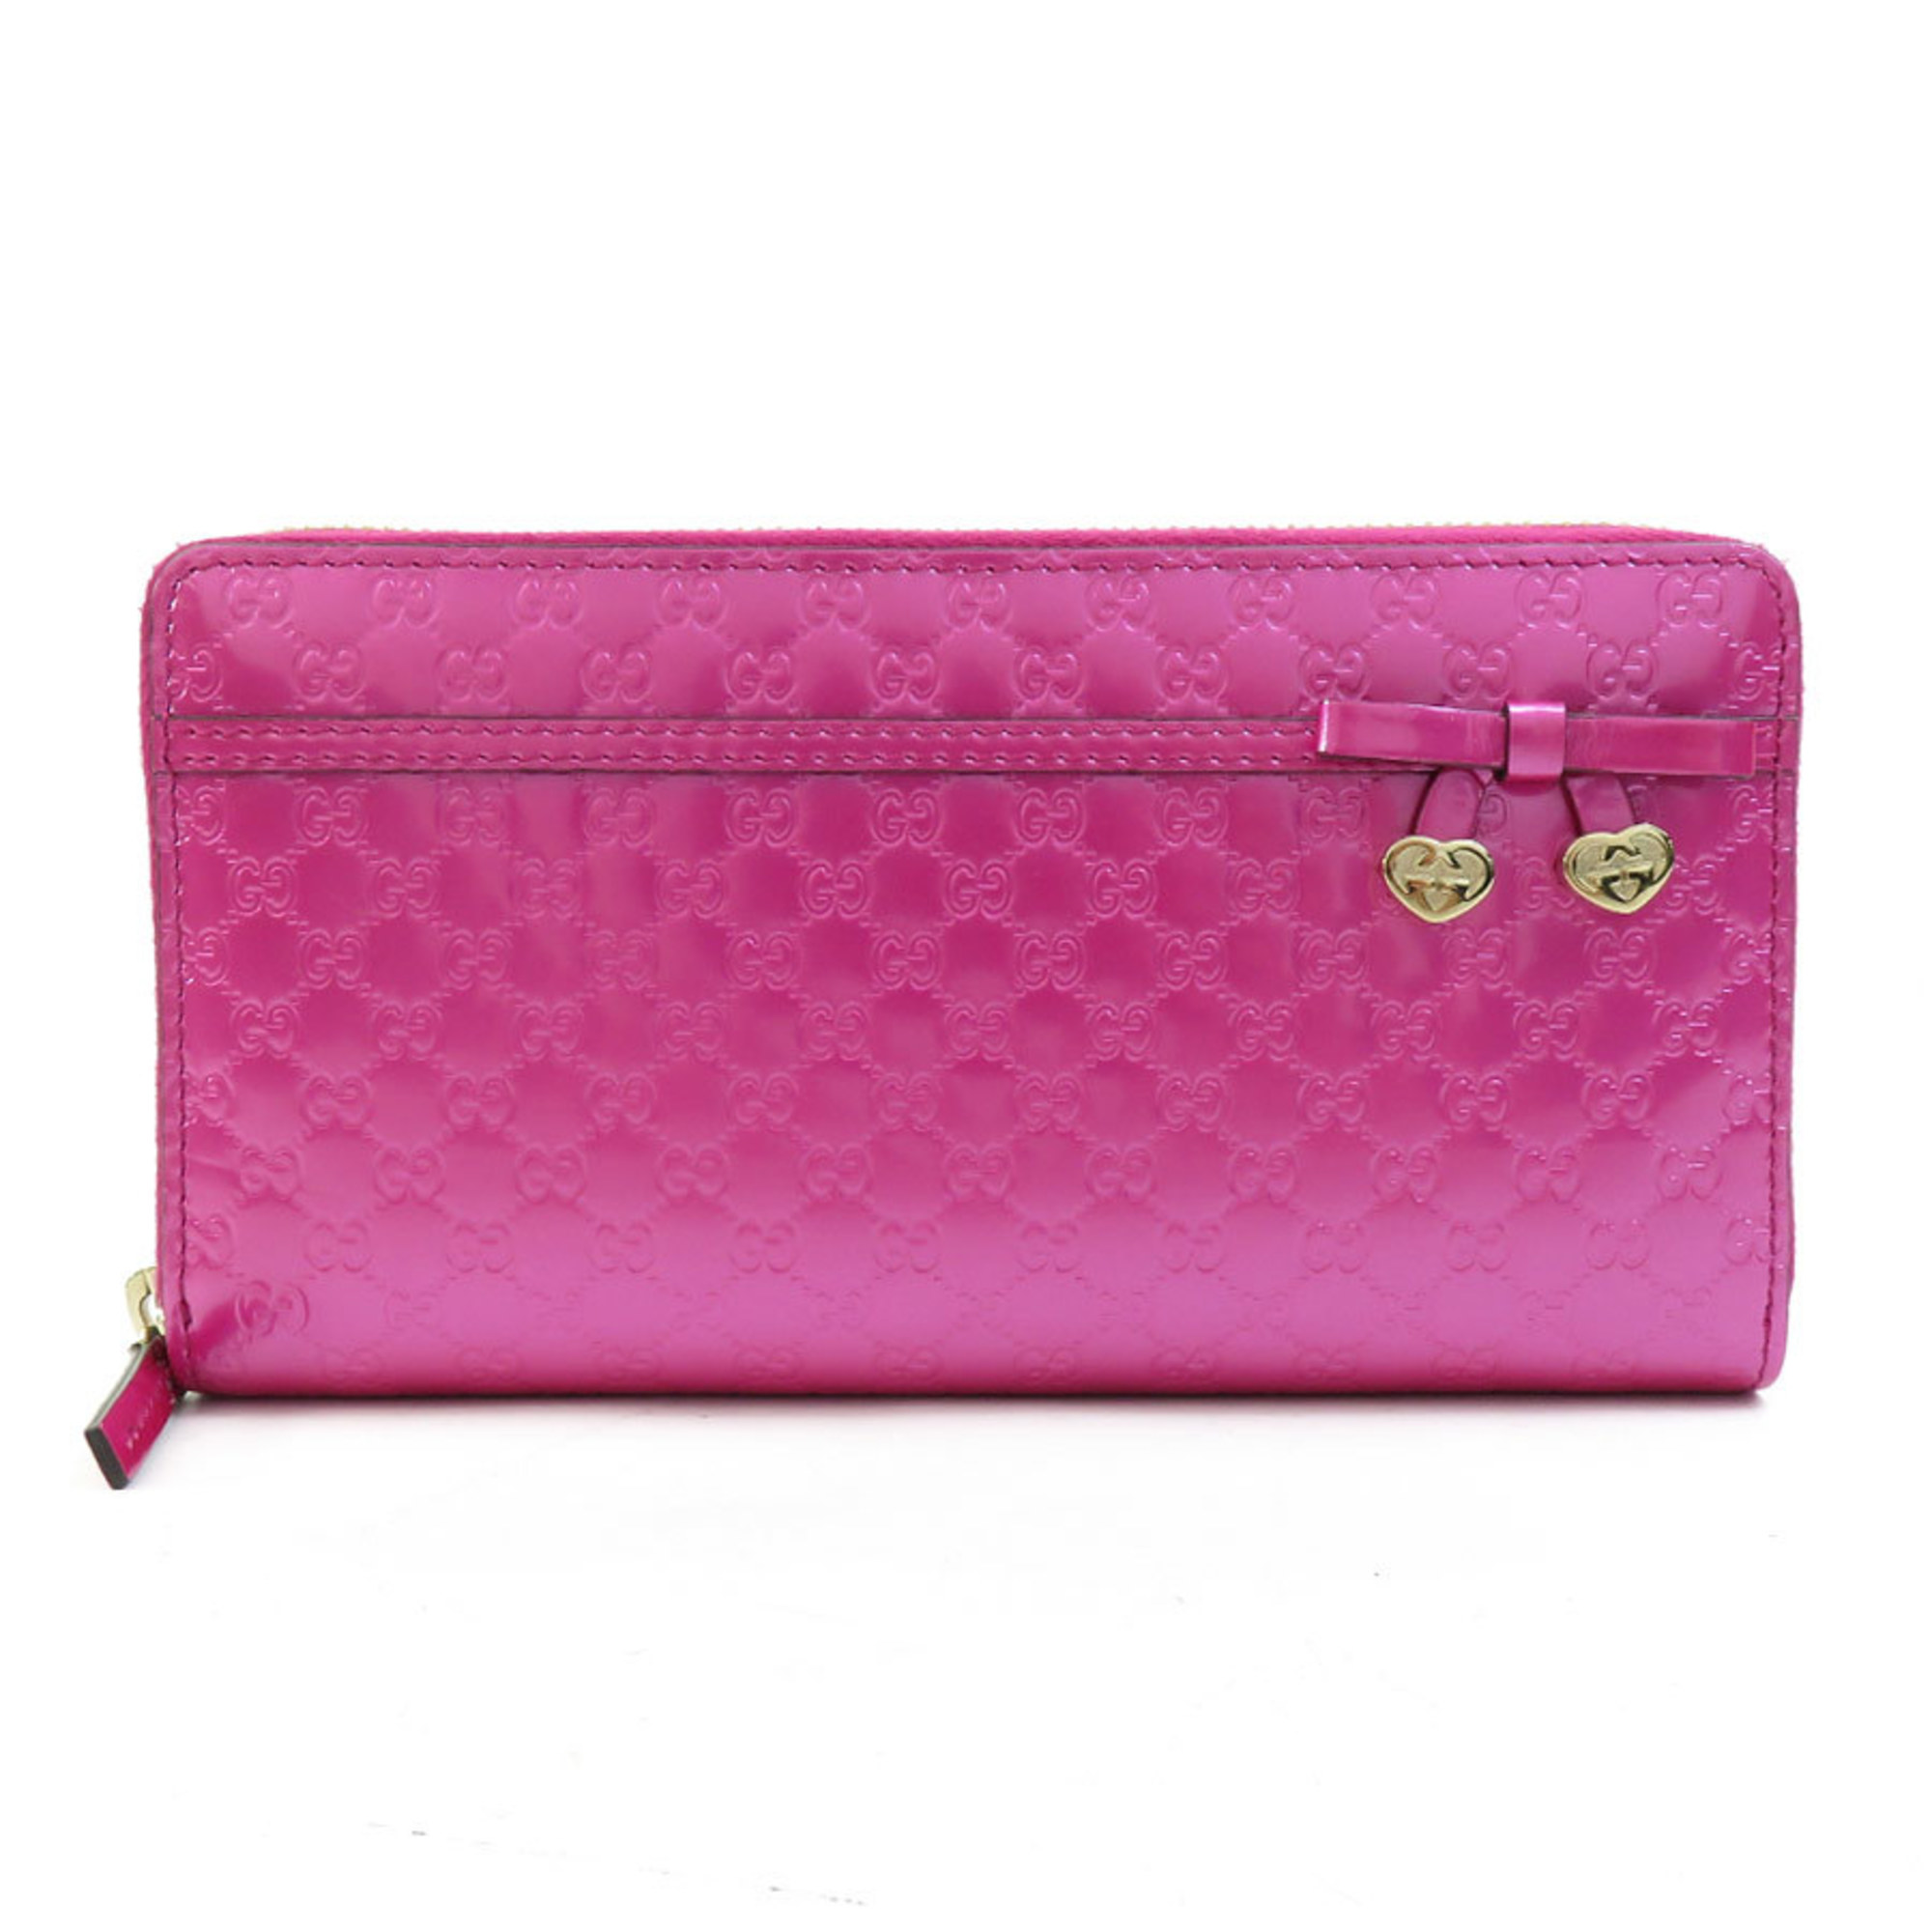 GUCCI Round Long Wallet Guccissima Patent Leather Pink Women's 307997 55653f